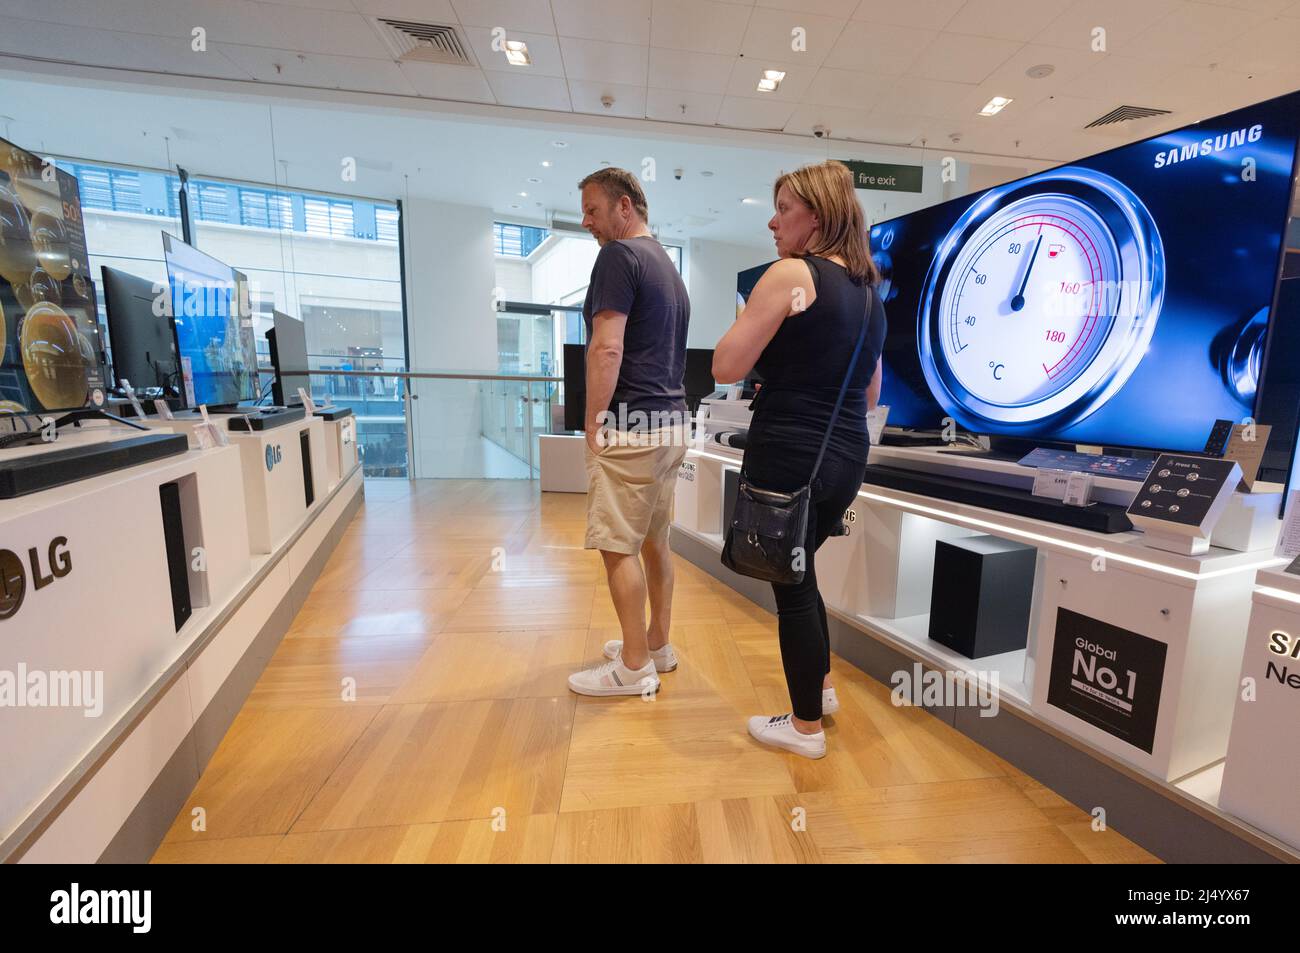 Couple buying a TV; people shopping for a new television, John Lewis store interior, Cambridge UK Stock Photo